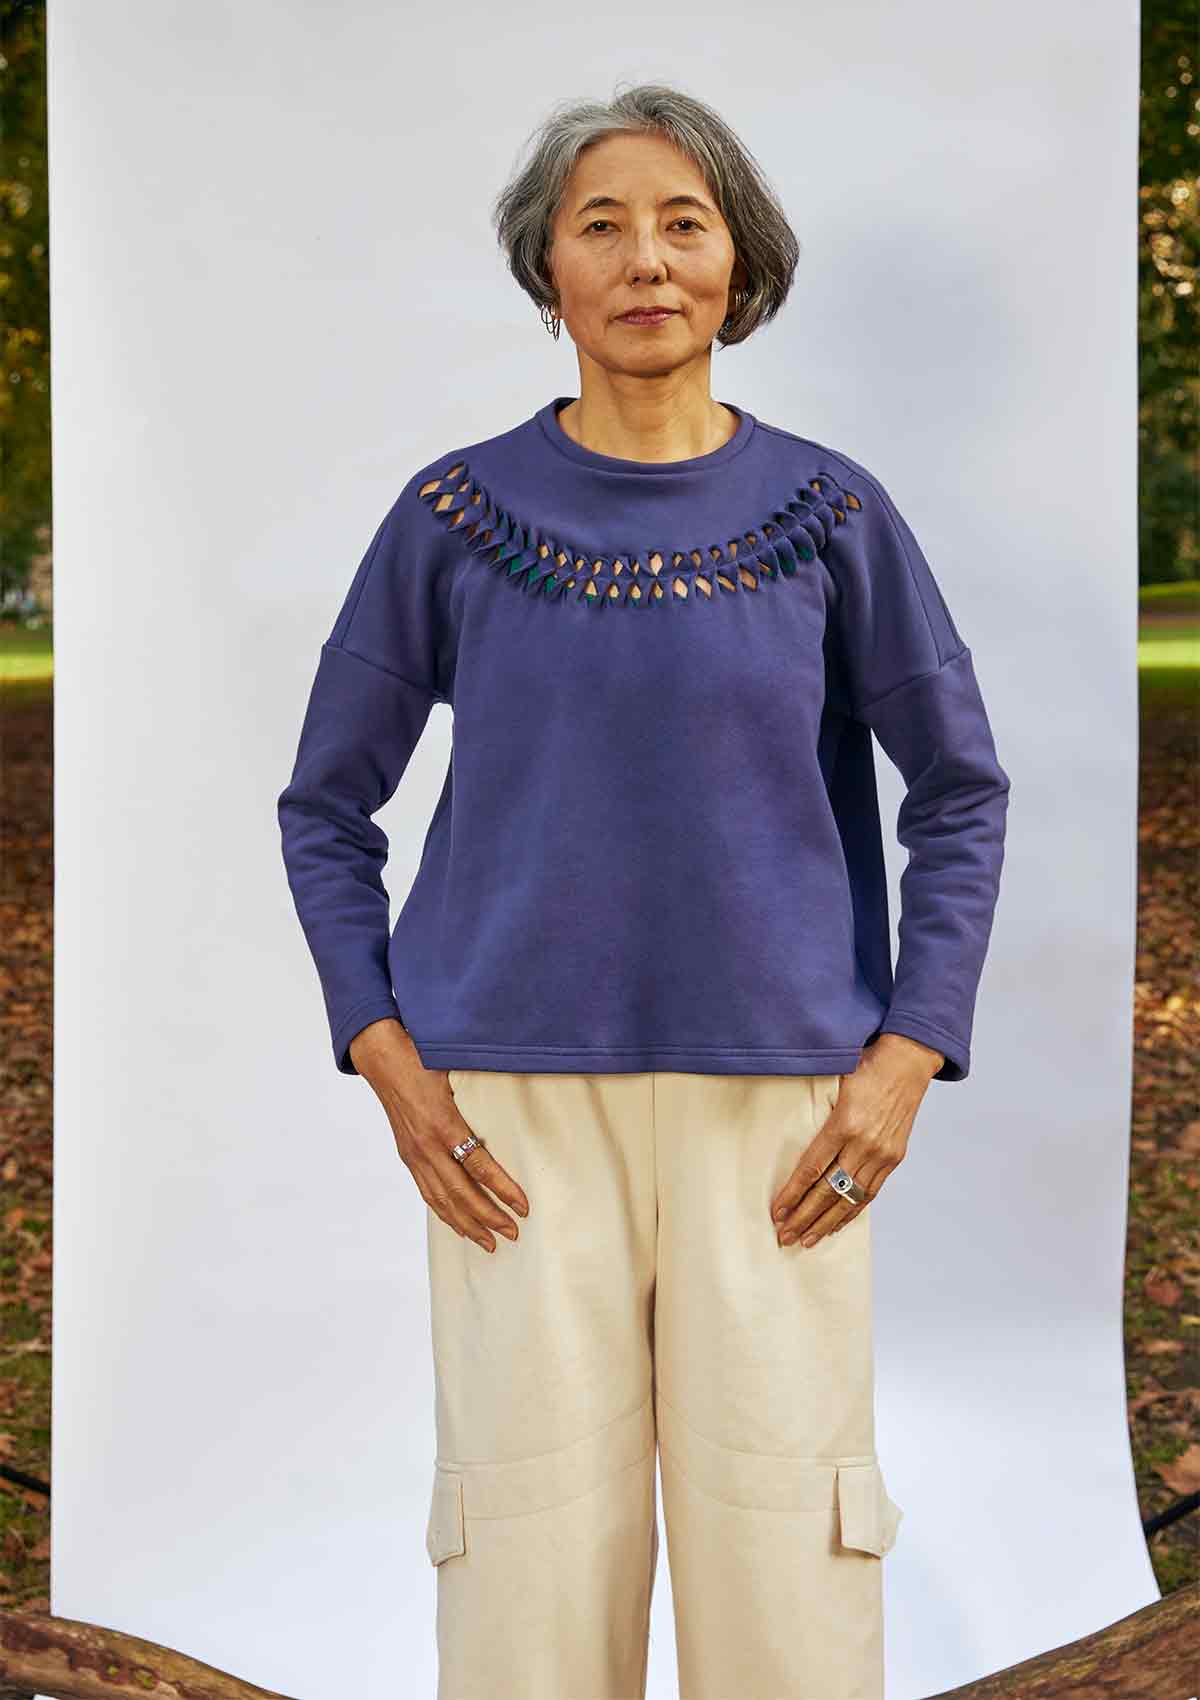 Women standing face on wearing the Anni Sweatshirt in Navy with detailing where the fabric is cut, twisted and stitched back in place.  She is standing in front of a white background in a park